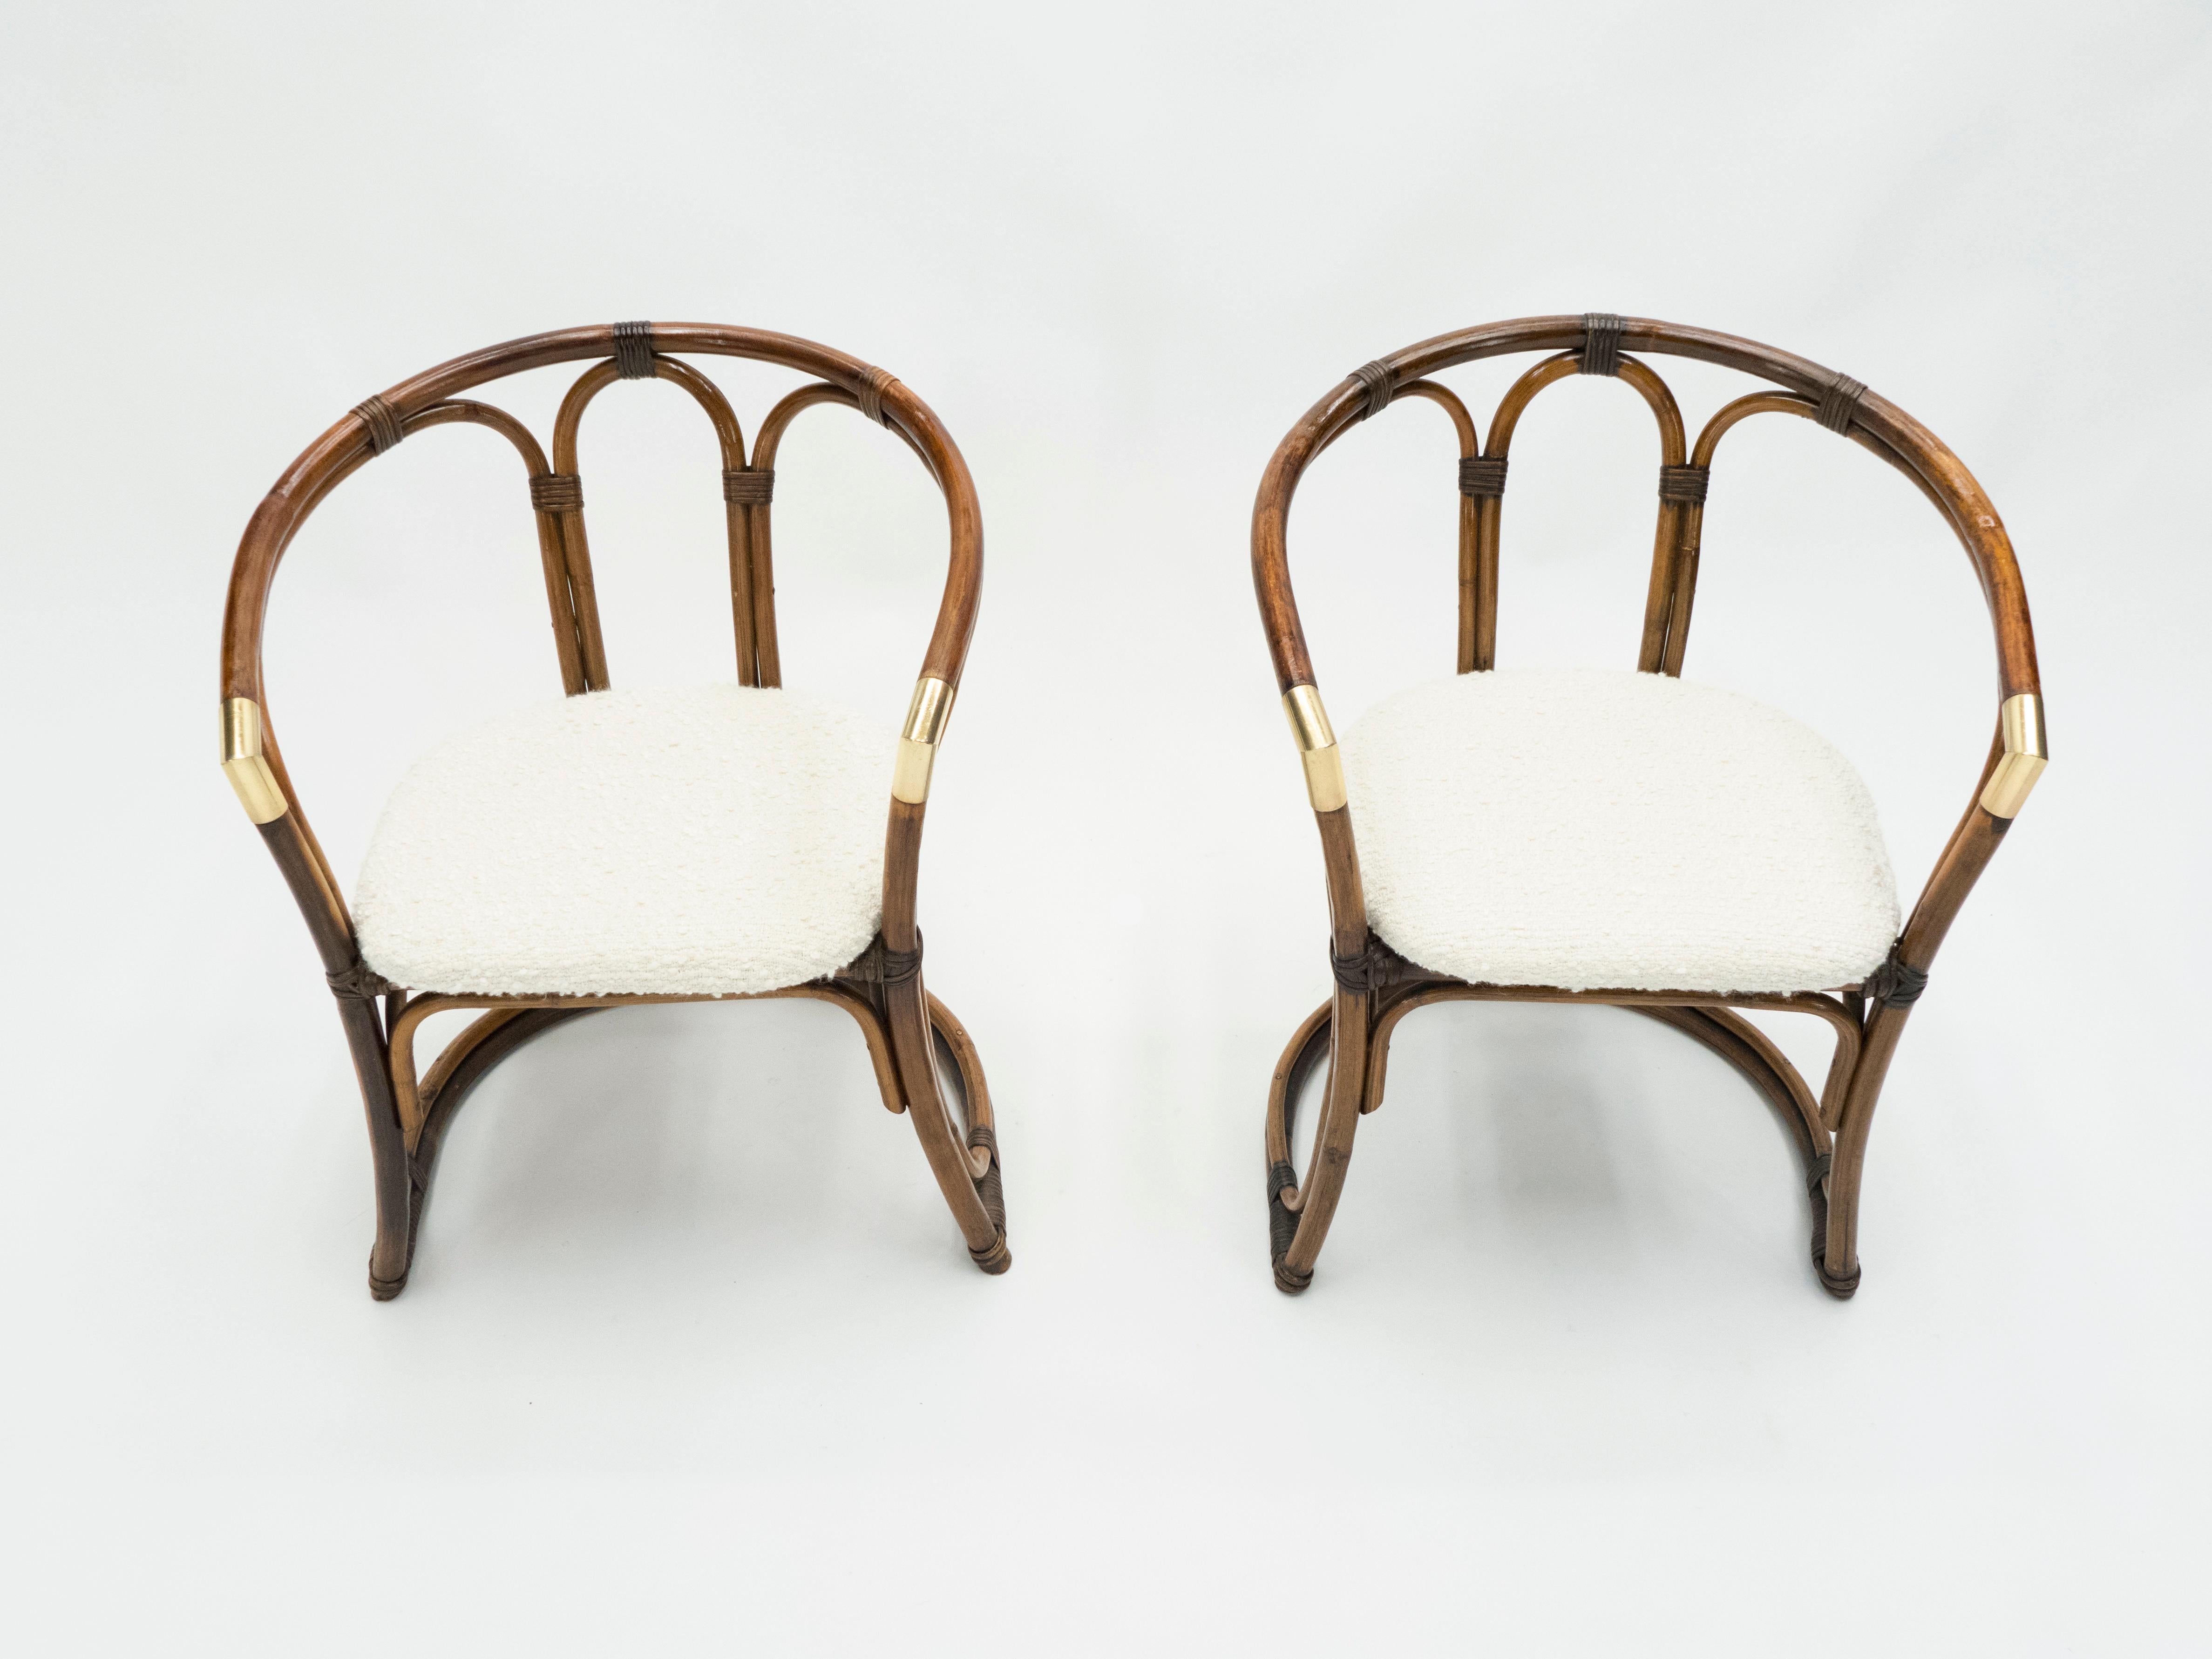 This pair of bamboo armchairs from the Mid-Century Modern French Riviera period is bursting with nostalgia. A beautiful brown bamboo structure with brass accents and bouclette wool seating would feel right at home in a stylish vacation house by the